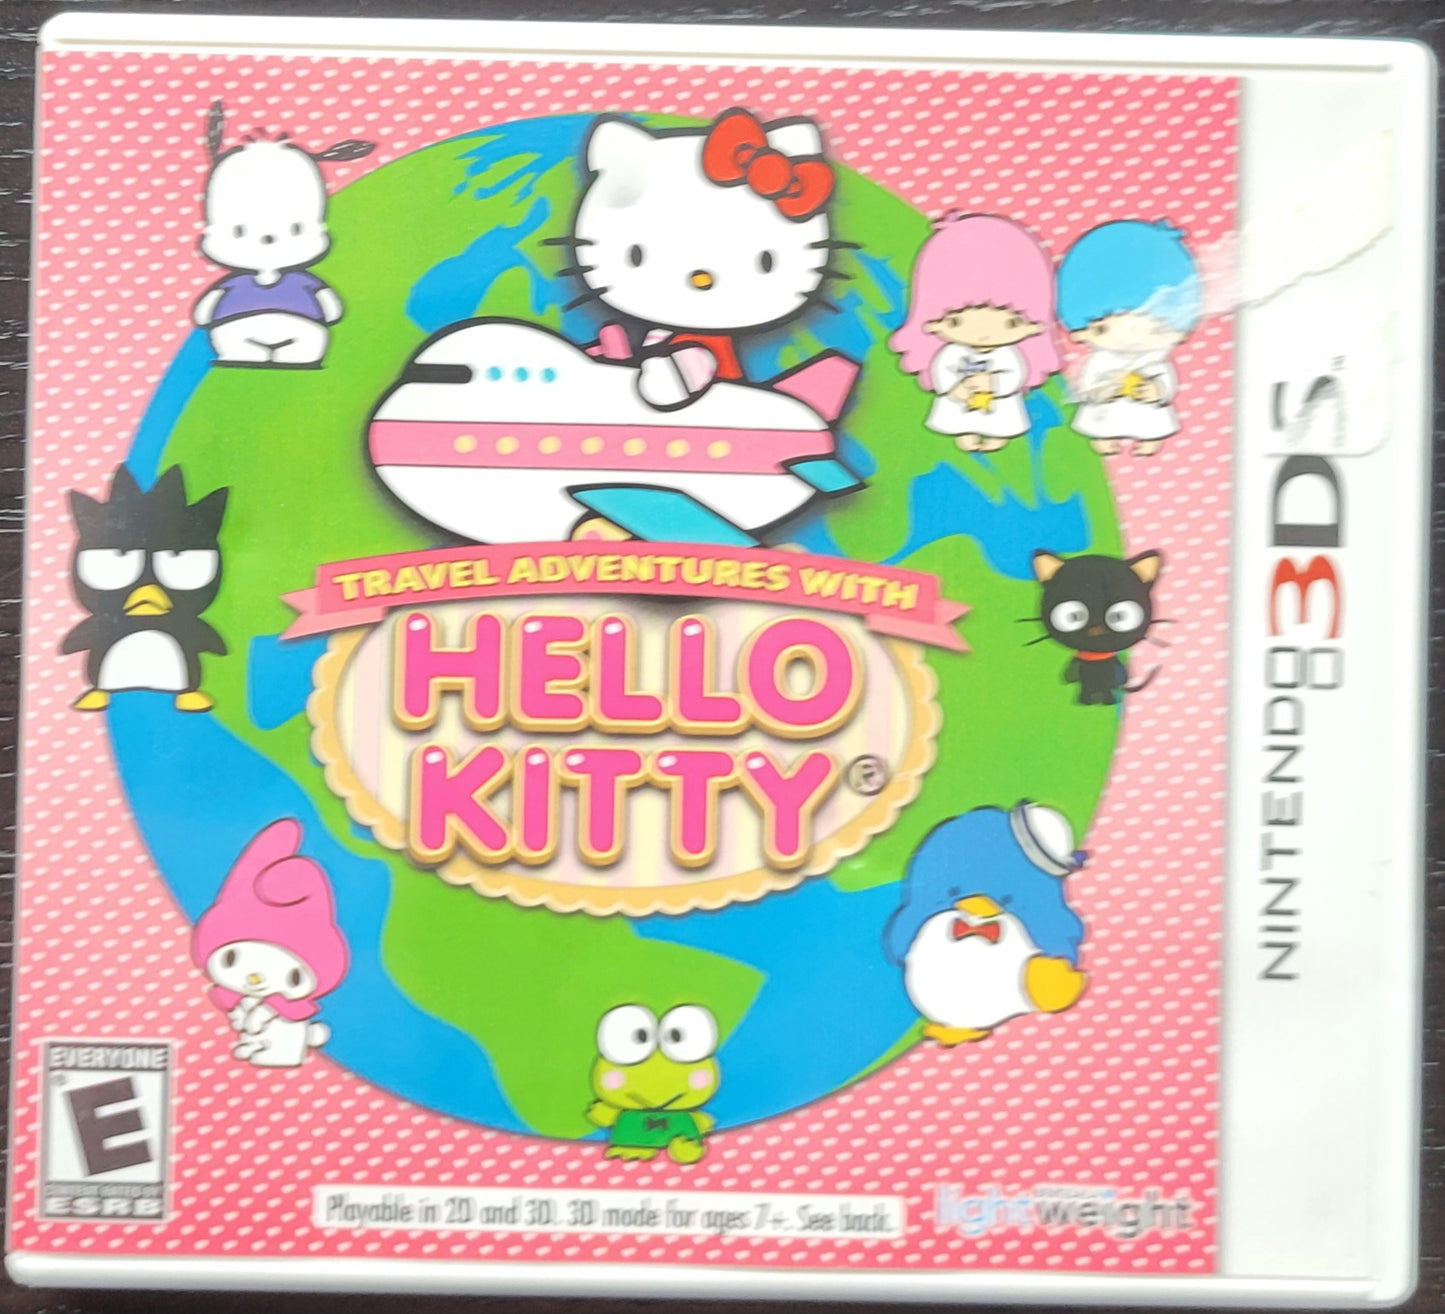 Travel Adventures With Hello Kitty - Nintendo 3DS 2008 - Handheld Console NTSC Cartridge Tested & Working